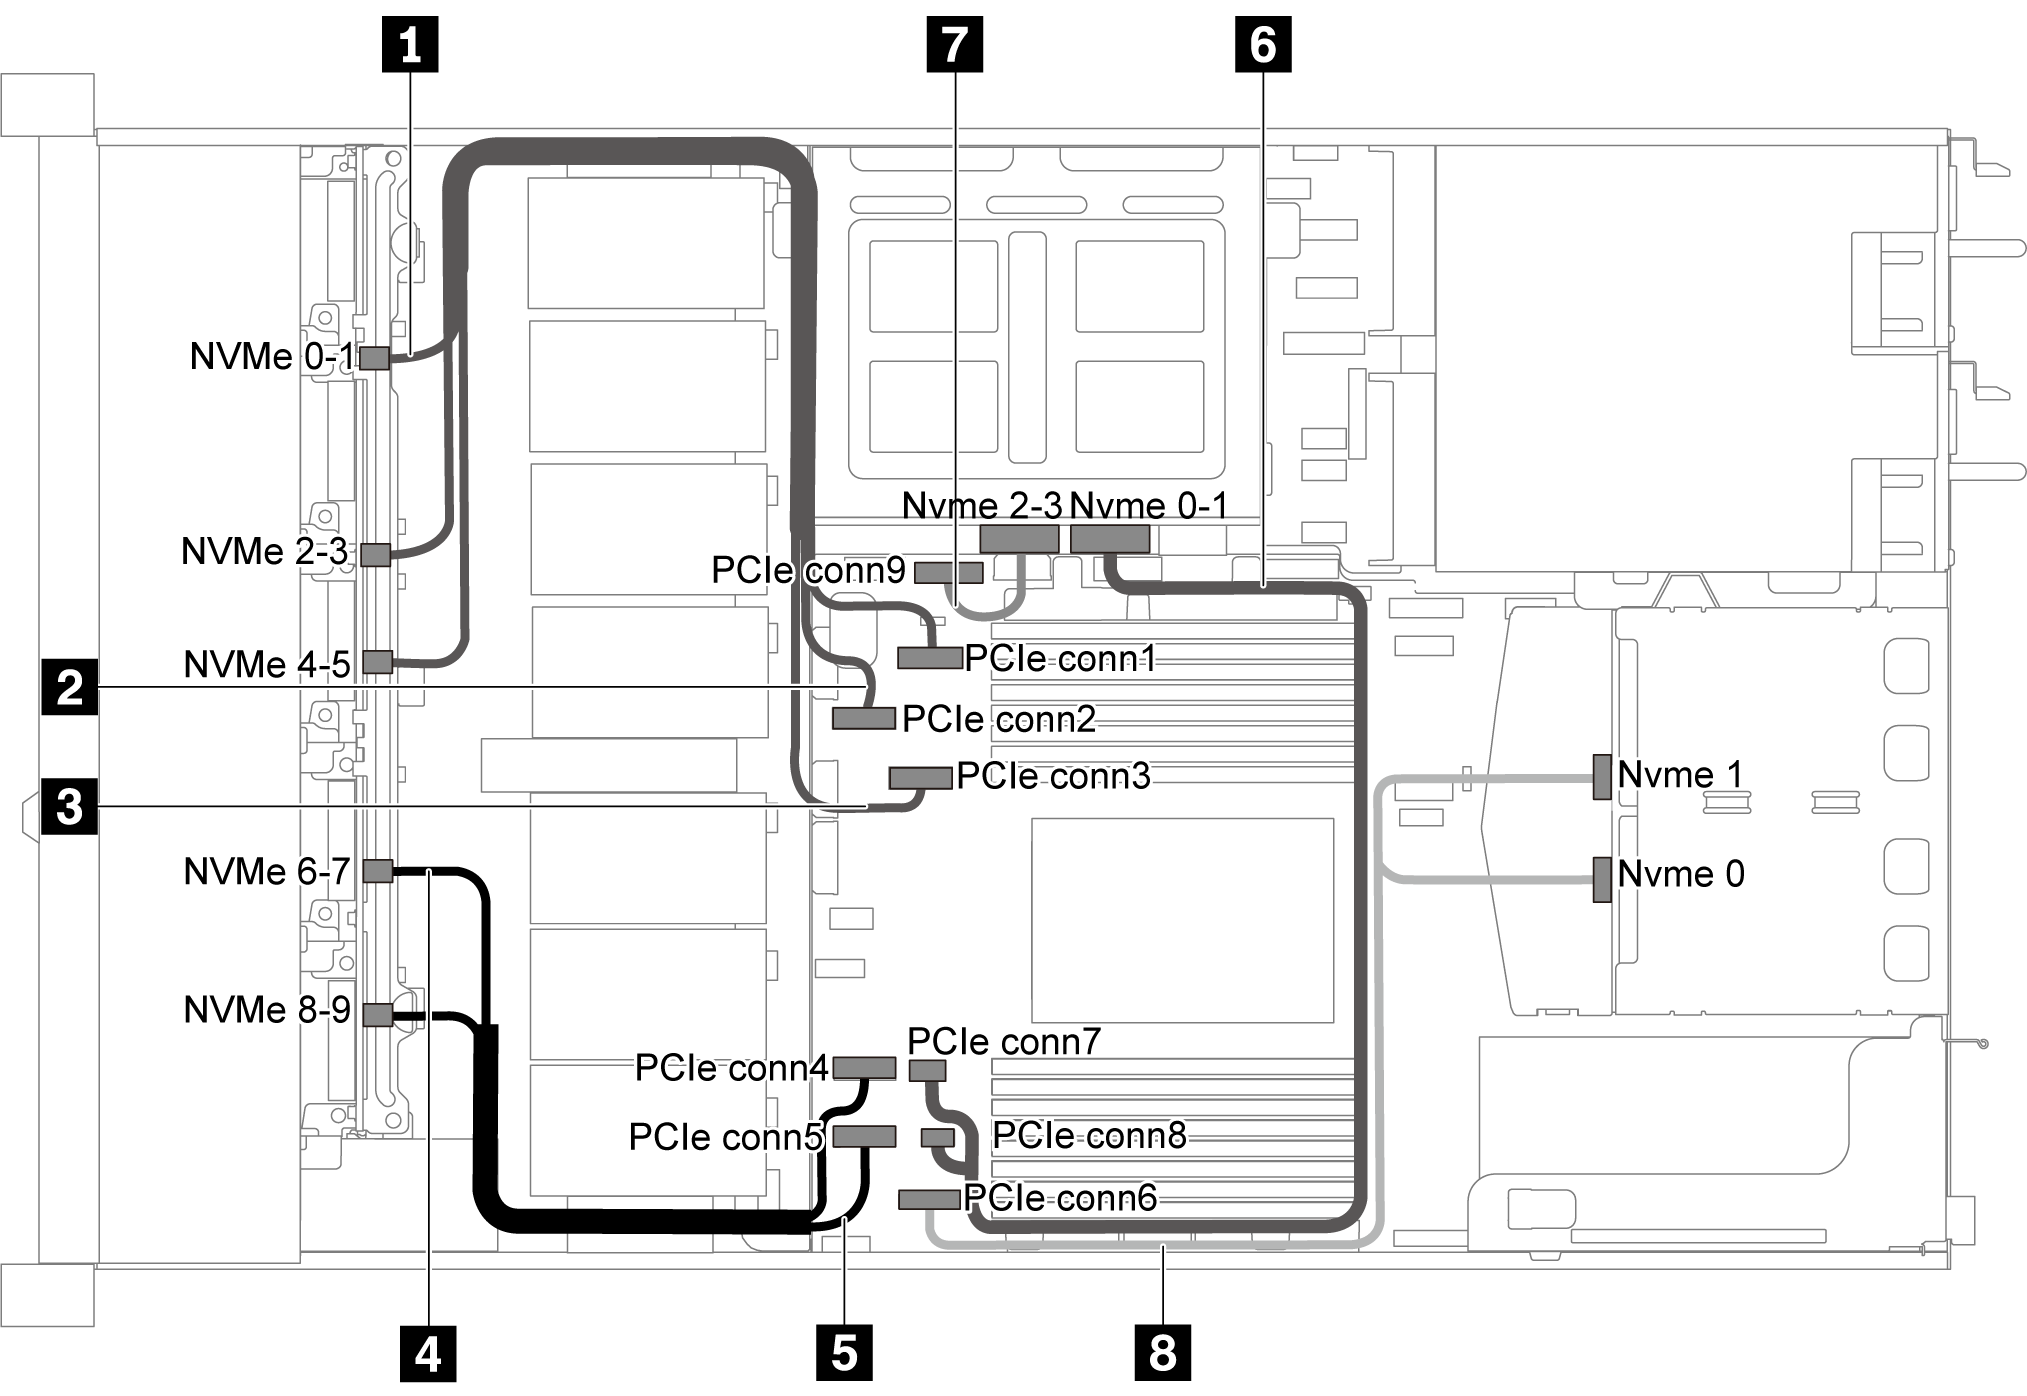 Cable routing for server model with ten 2.5-inch SAS/SATA/NVMe drives, rear NVMe drive assembly, middle NVMe drive assembly and one 16i RAID/HBA adapter